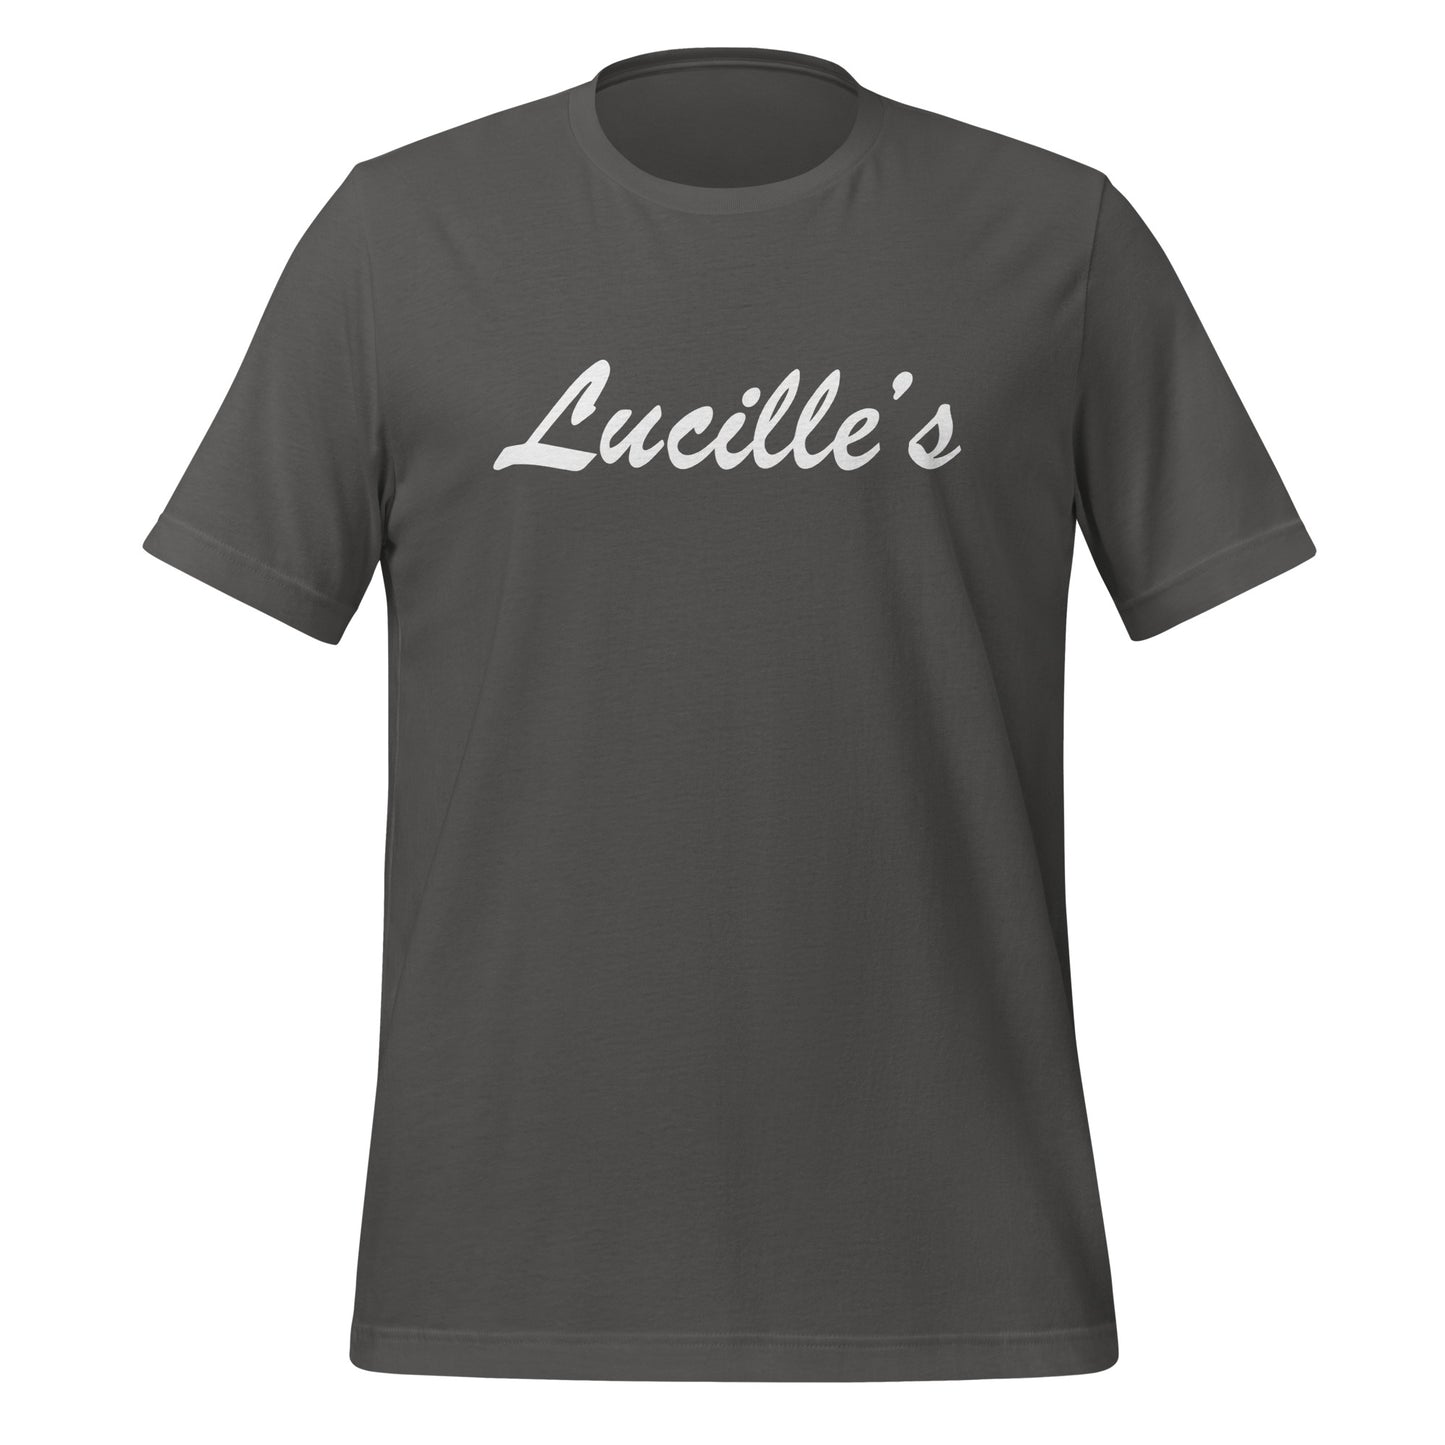 Lucille's unisex printed t-shirt